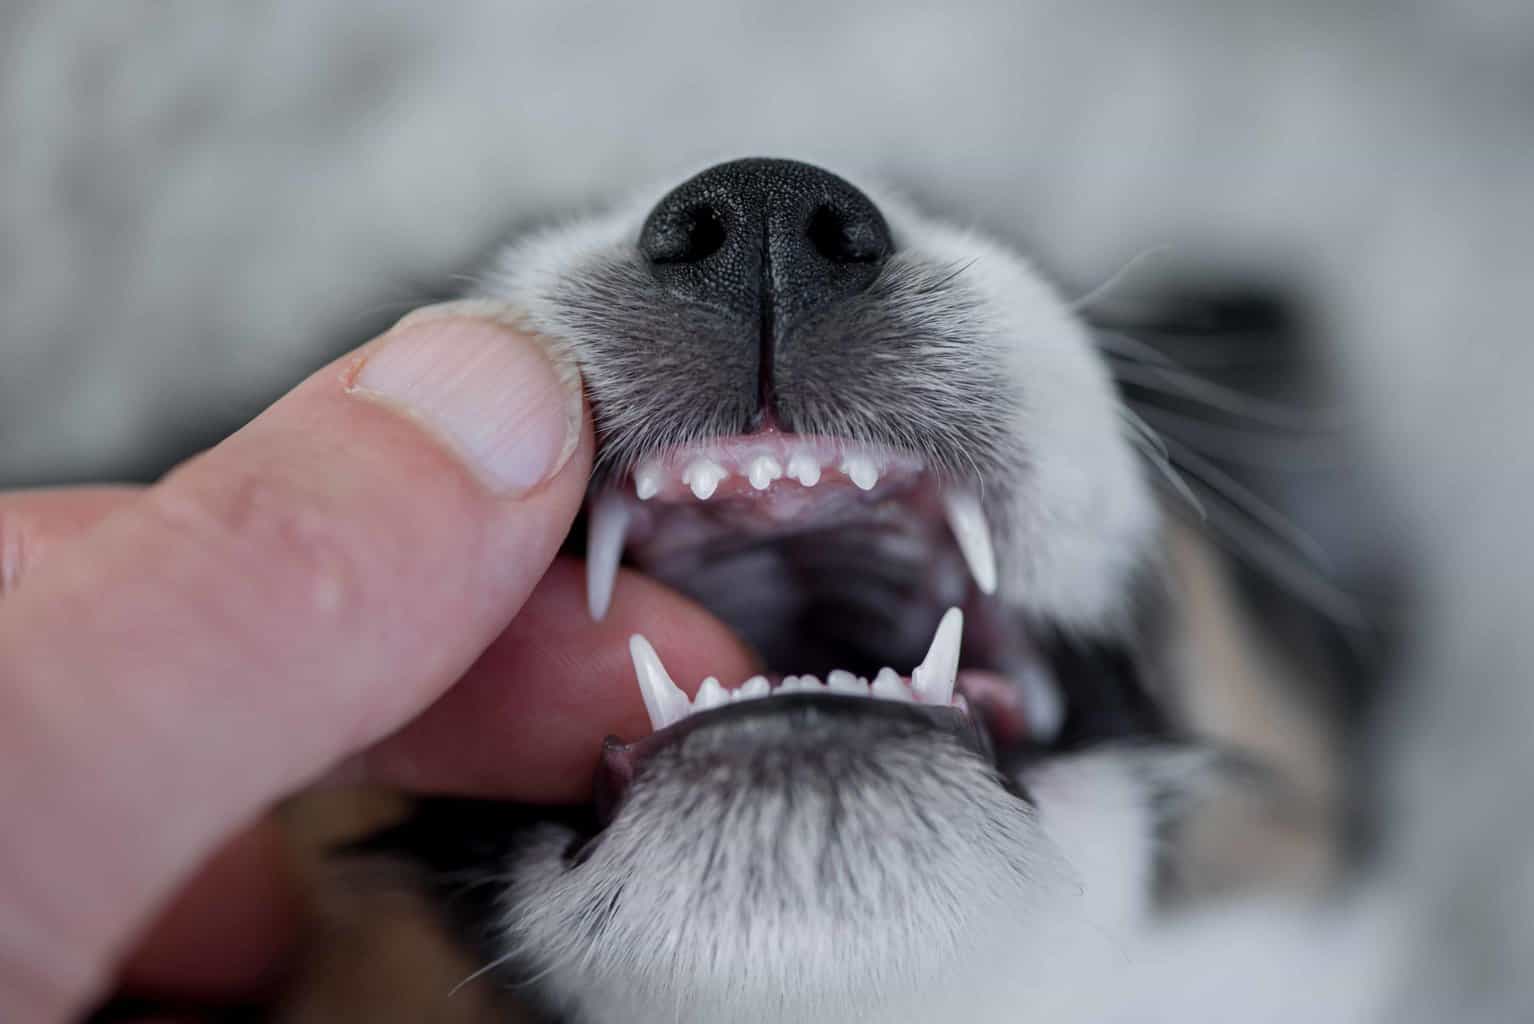 Dog owner examines puppy teeth. All dog owners need to work to stop puppy bites, so they aren’t aggressive when they get older. Use these tips to train puppies not to bite.